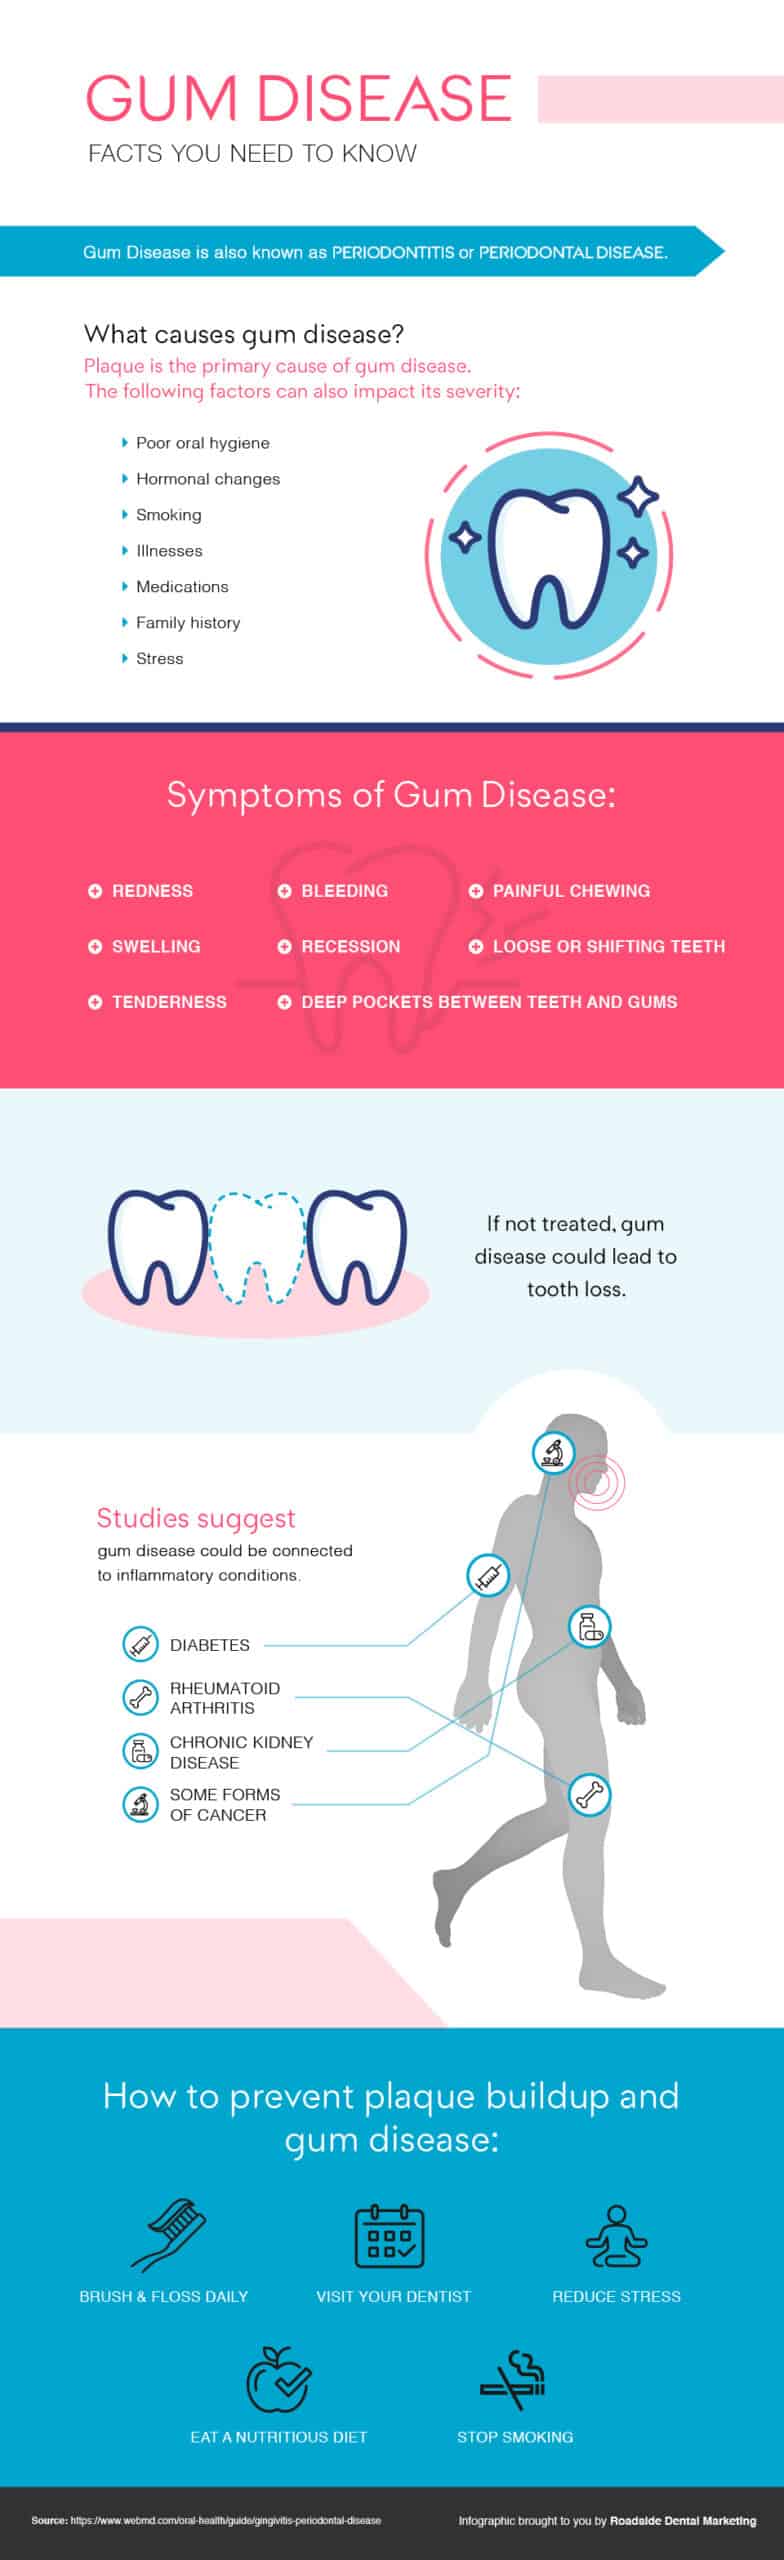 Learn how to handle common dental emergencies in this infographic.